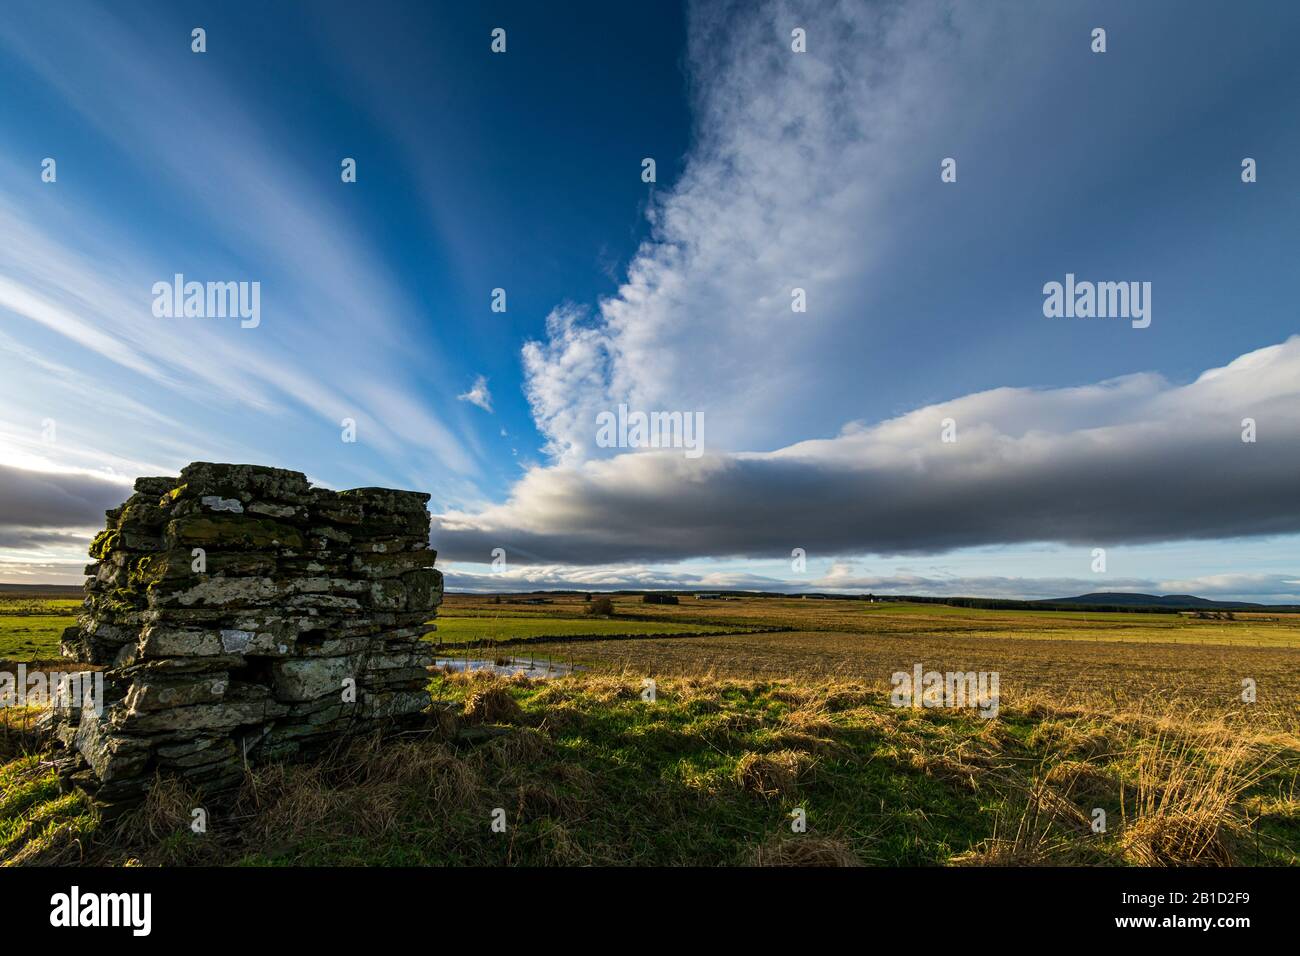 Dramatic sky above an old square cairn near Westerdale, Caithness, Scotland, UK Stock Photo